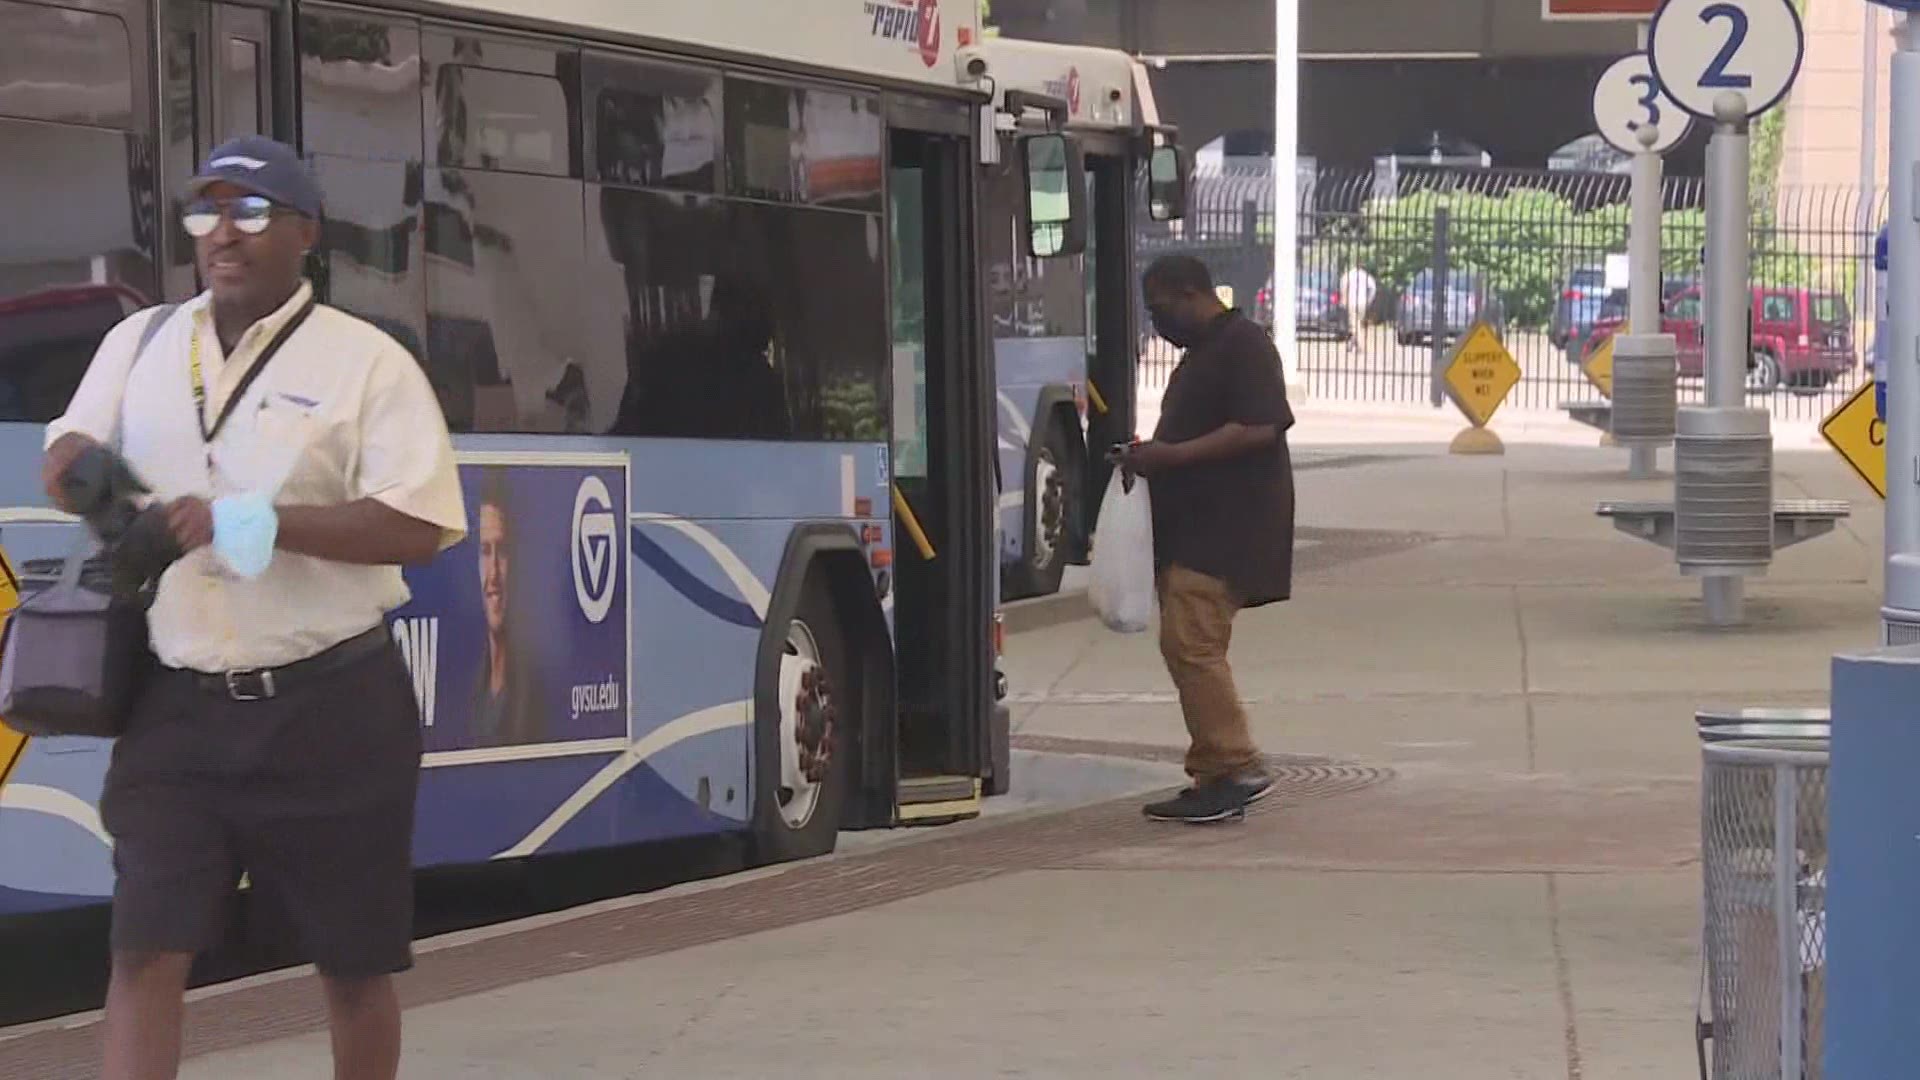 As the Grand Rapids area starts reopening from the COVID-19 pandemic, The Rapid said its was working to provide critical transportation services.